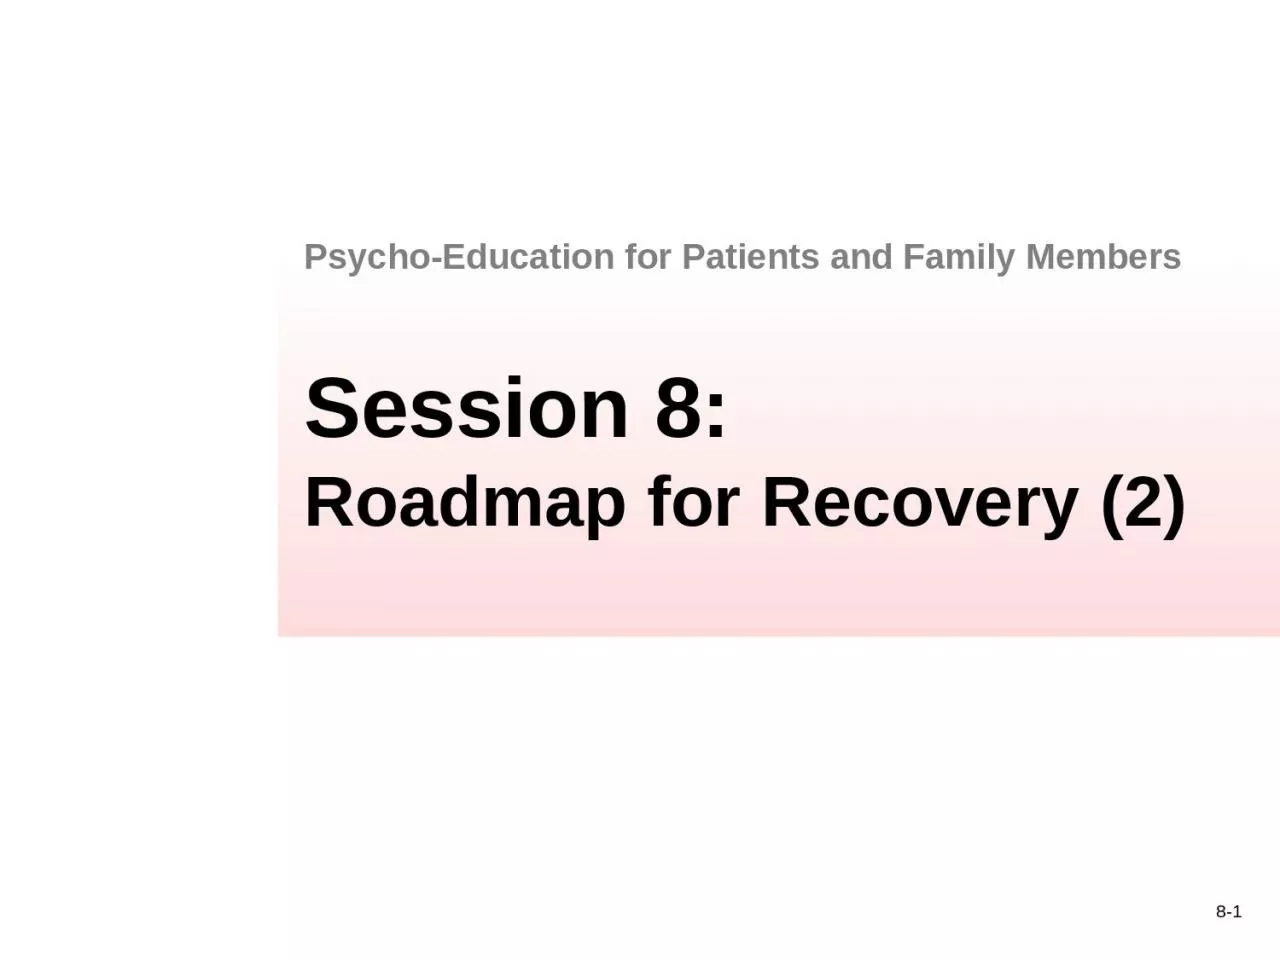 Session 8: Roadmap for Recovery (2)